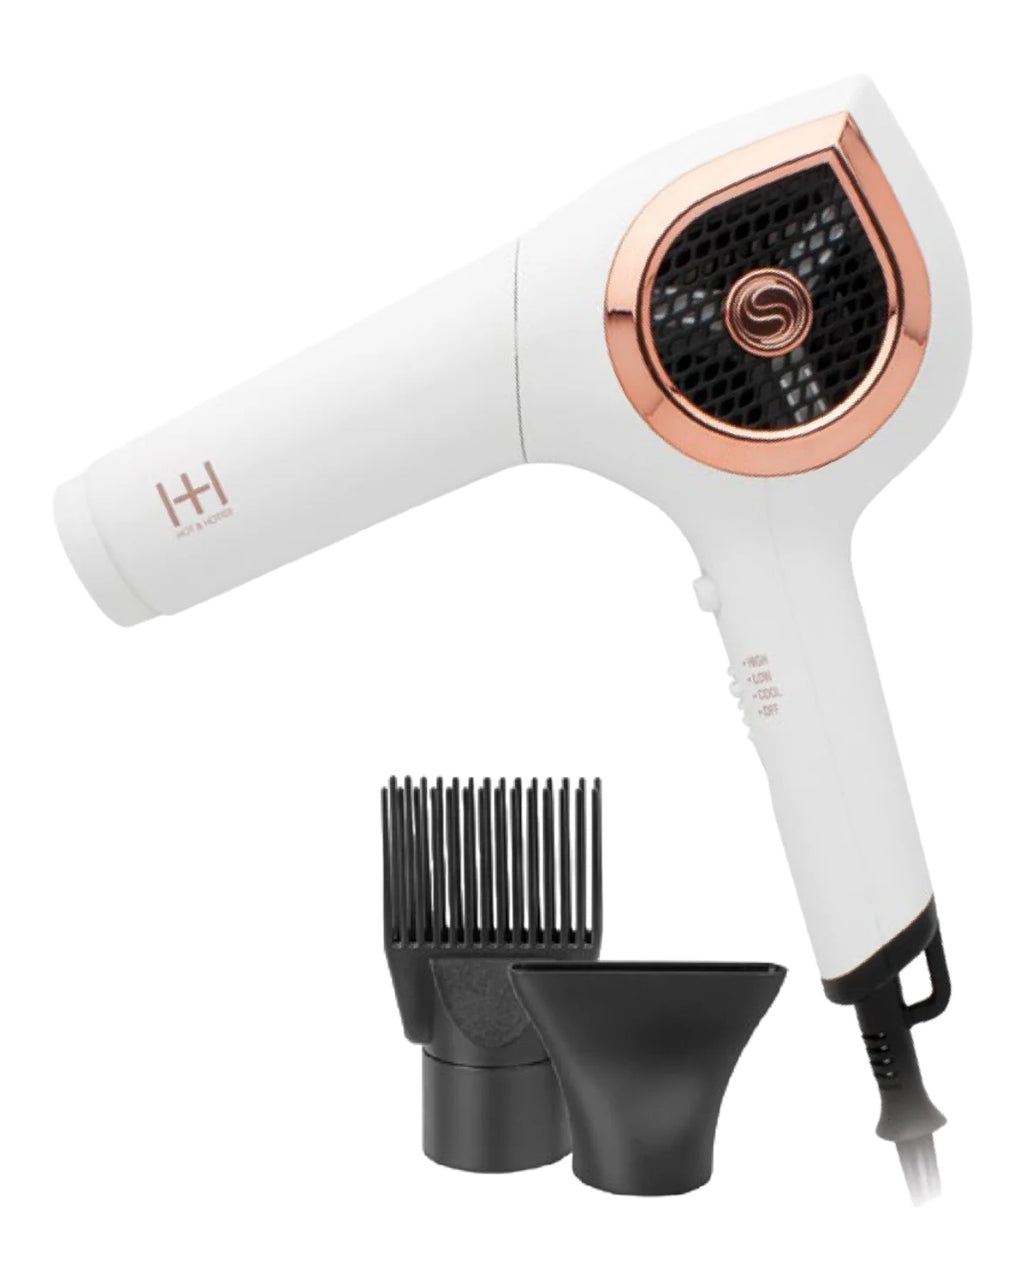 The Ceramic Ionic Turbo 3000 Hair Dryer from Hot & Hotter offers best-in-class performance and durability with its Ceramic Ionic Technology. With a powerful yet quiet motor and two attachments, this hair dryer is perfect for anyone looking for a new hair styling tool.